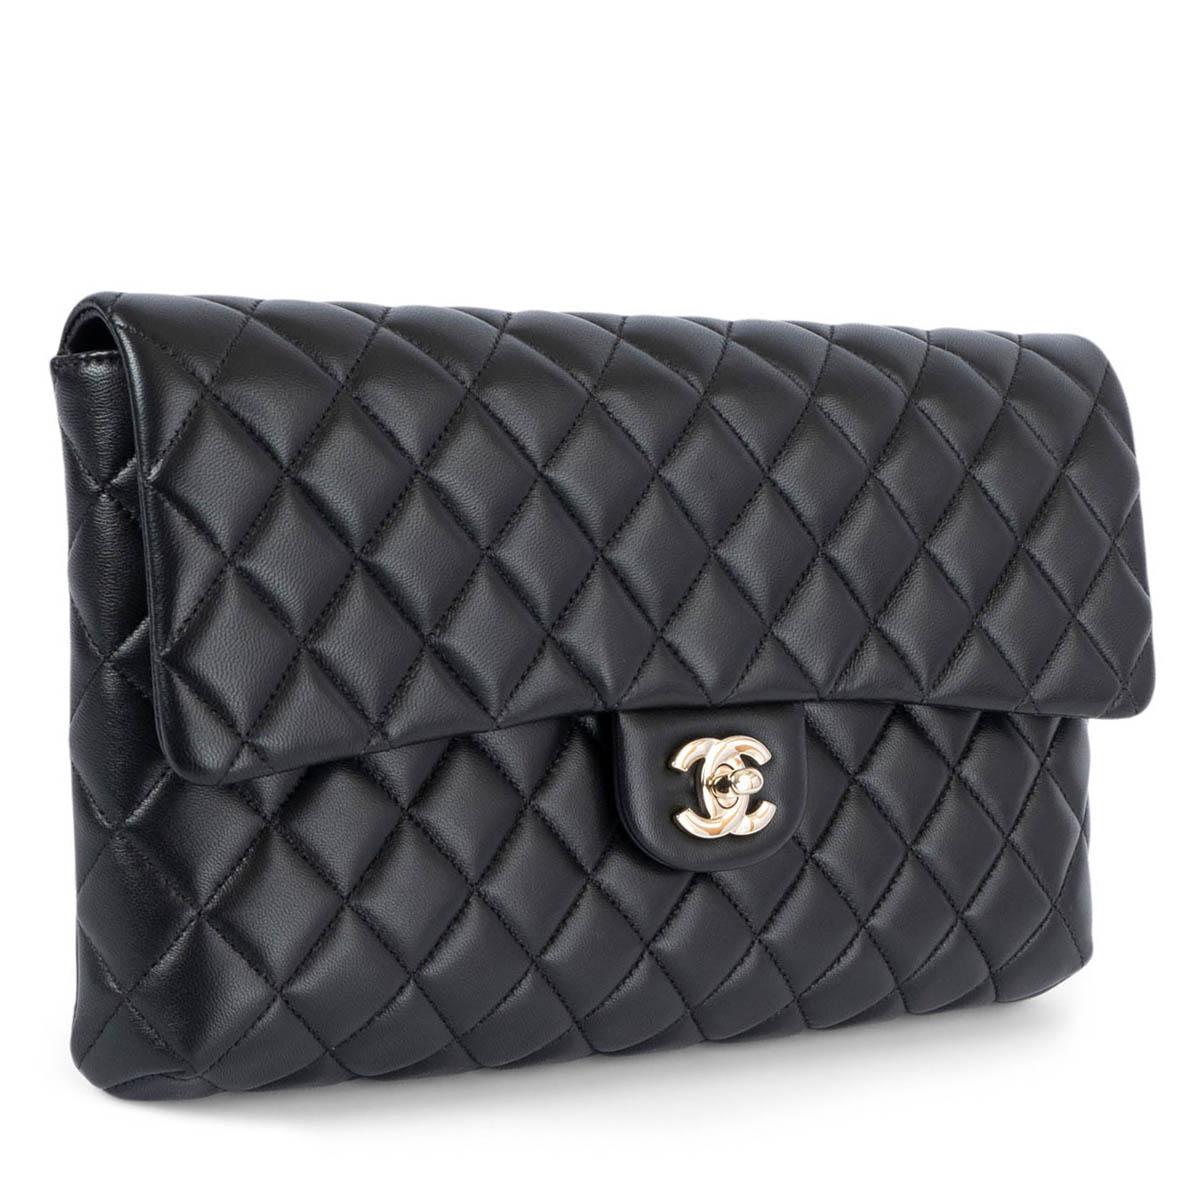 100% authentic Chanel quilted flap clutch in black lambskin leather featuring light gold-tone CC turn-lock closure. Lined in black calfskin with one zipper pocket against the back. Has been carried and is in excellent condition. Comes with dust